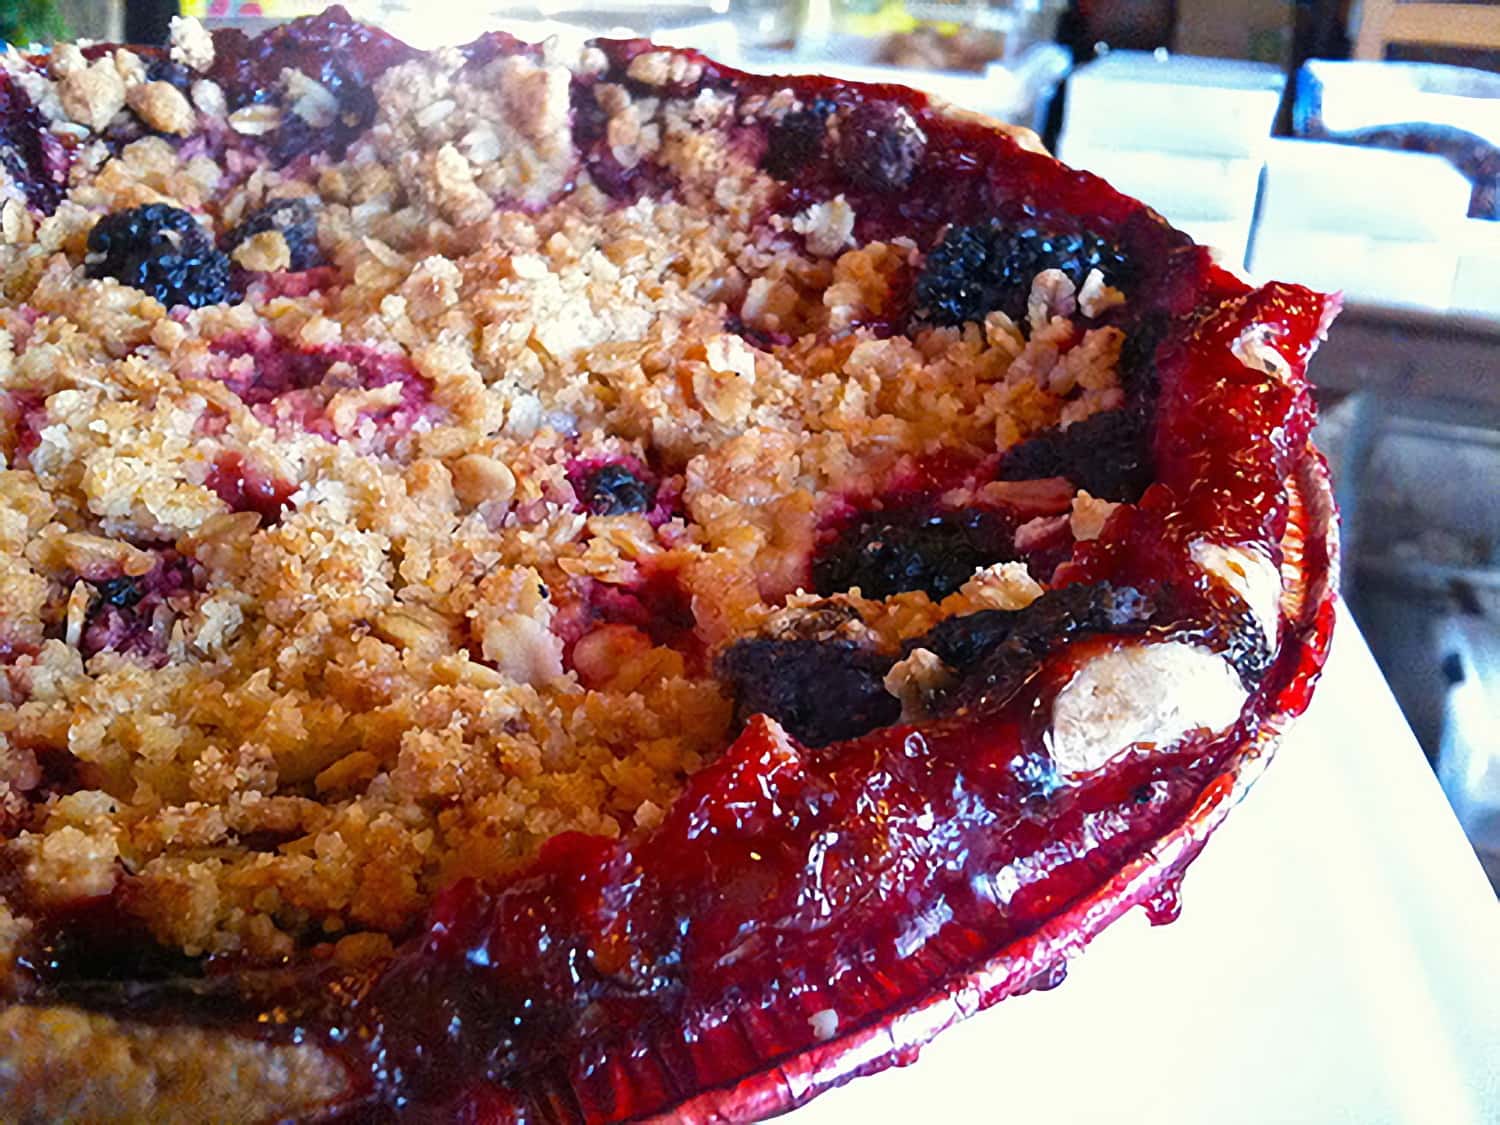 Pie Ranch mixed berry pie. Source.